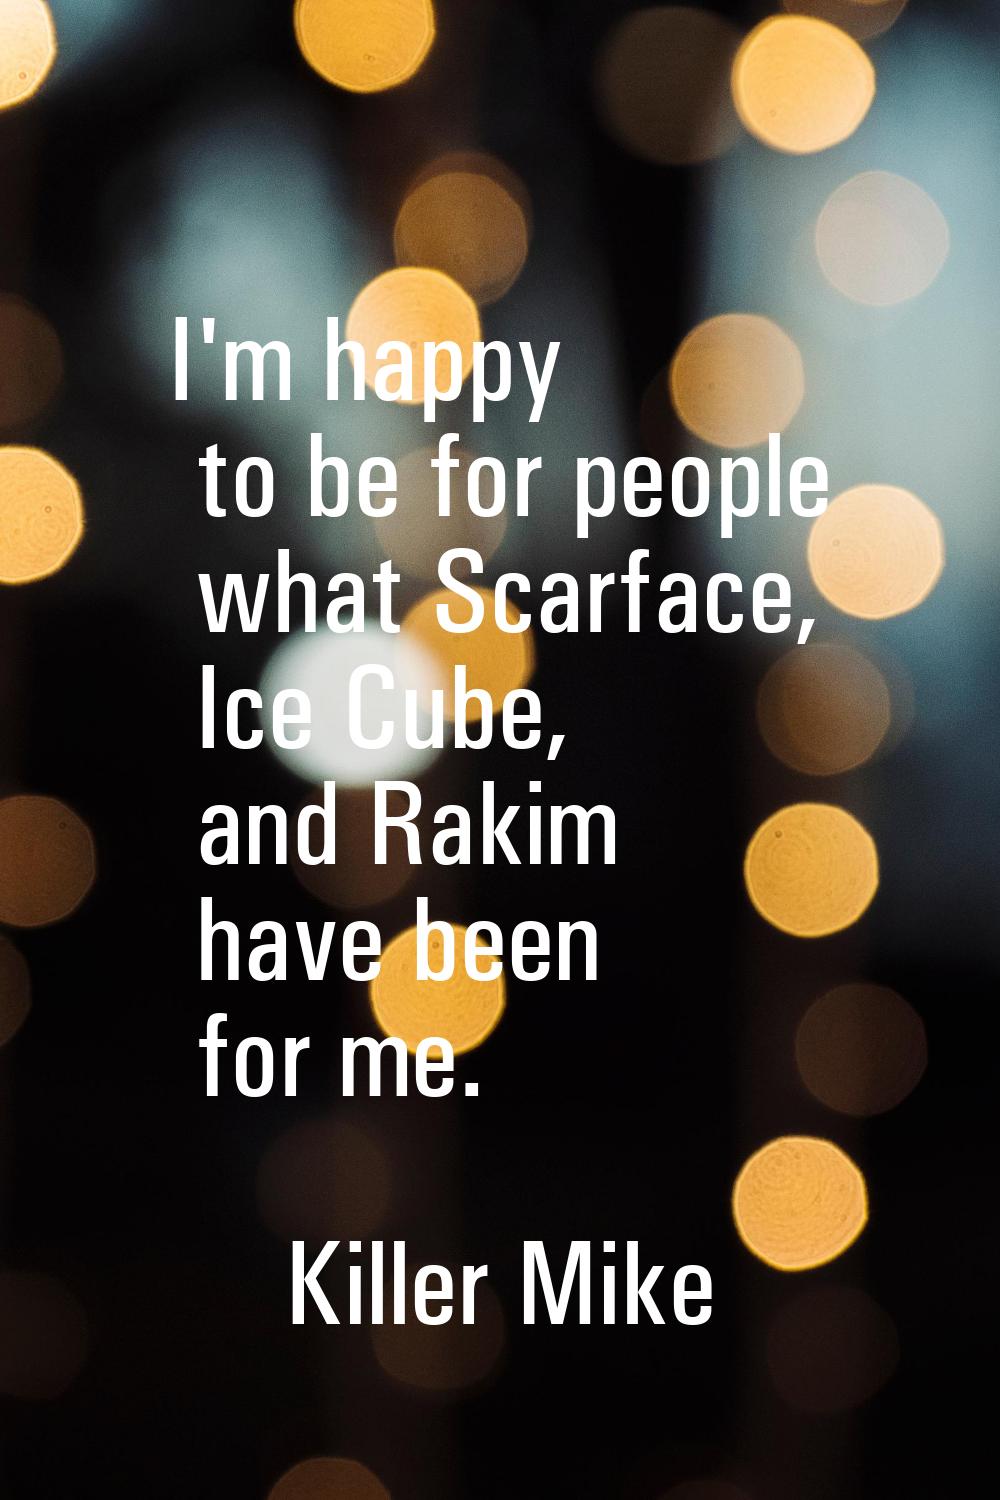 I'm happy to be for people what Scarface, Ice Cube, and Rakim have been for me.